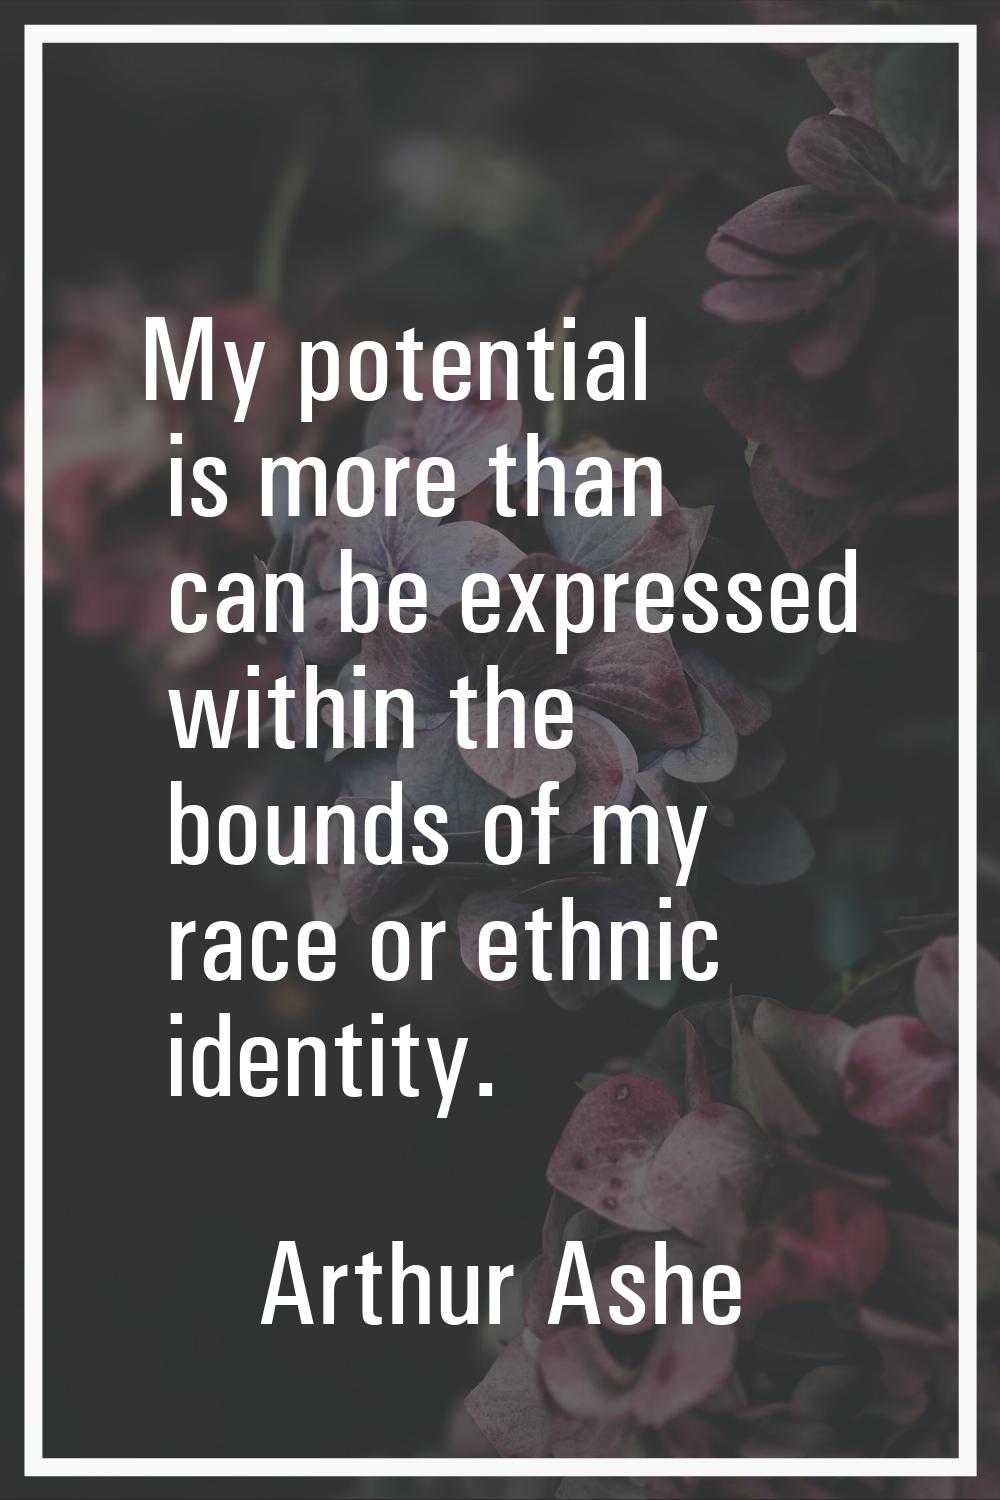 My potential is more than can be expressed within the bounds of my race or ethnic identity.